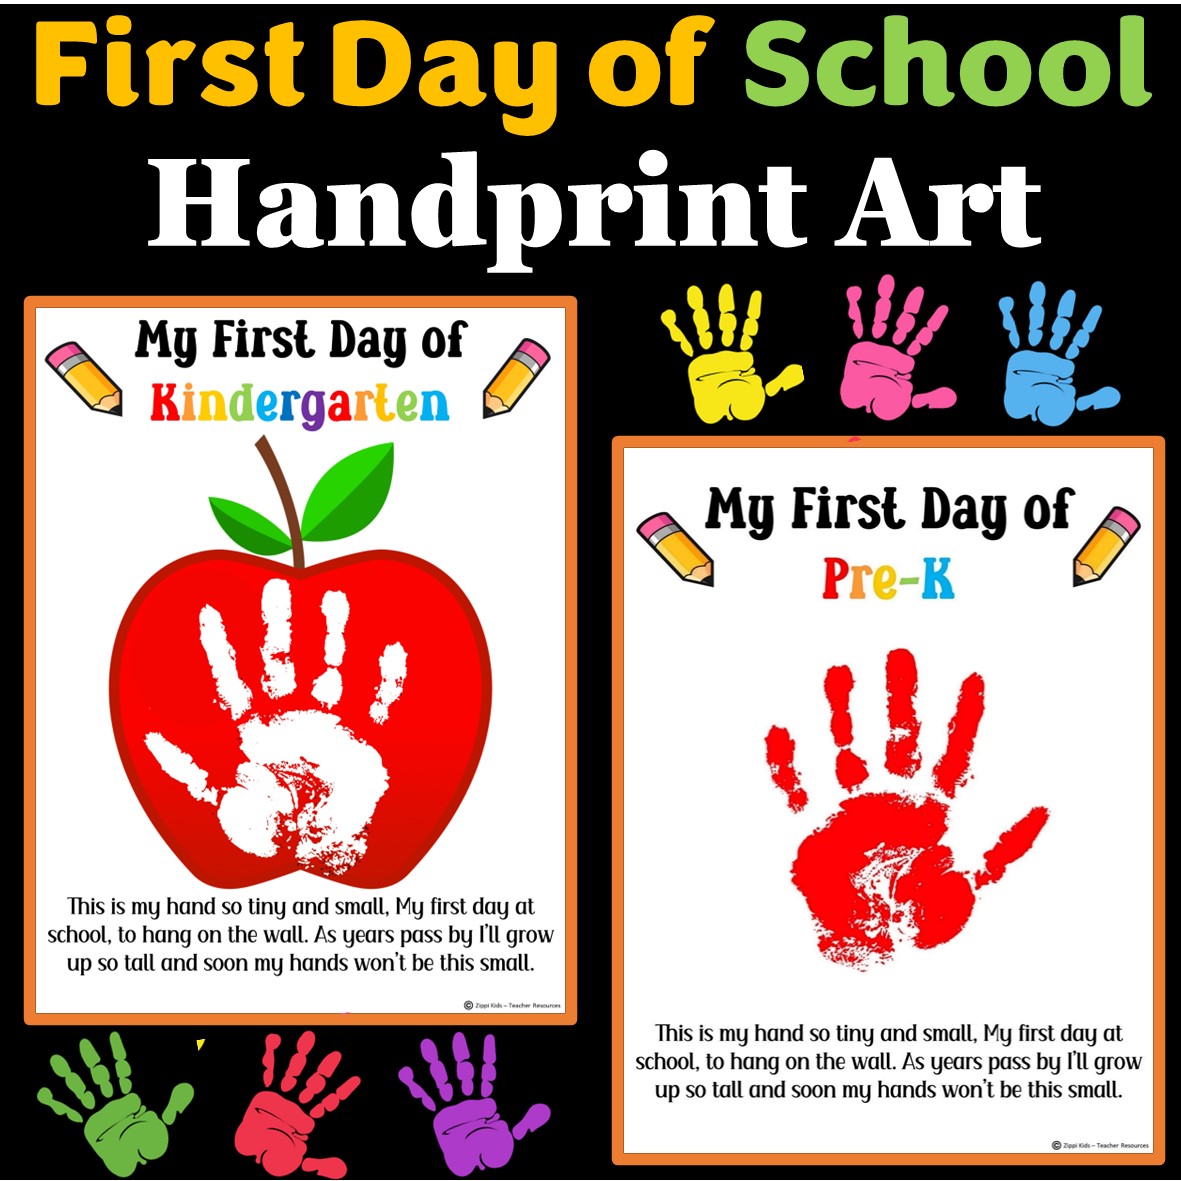 First day of School handprint with poem